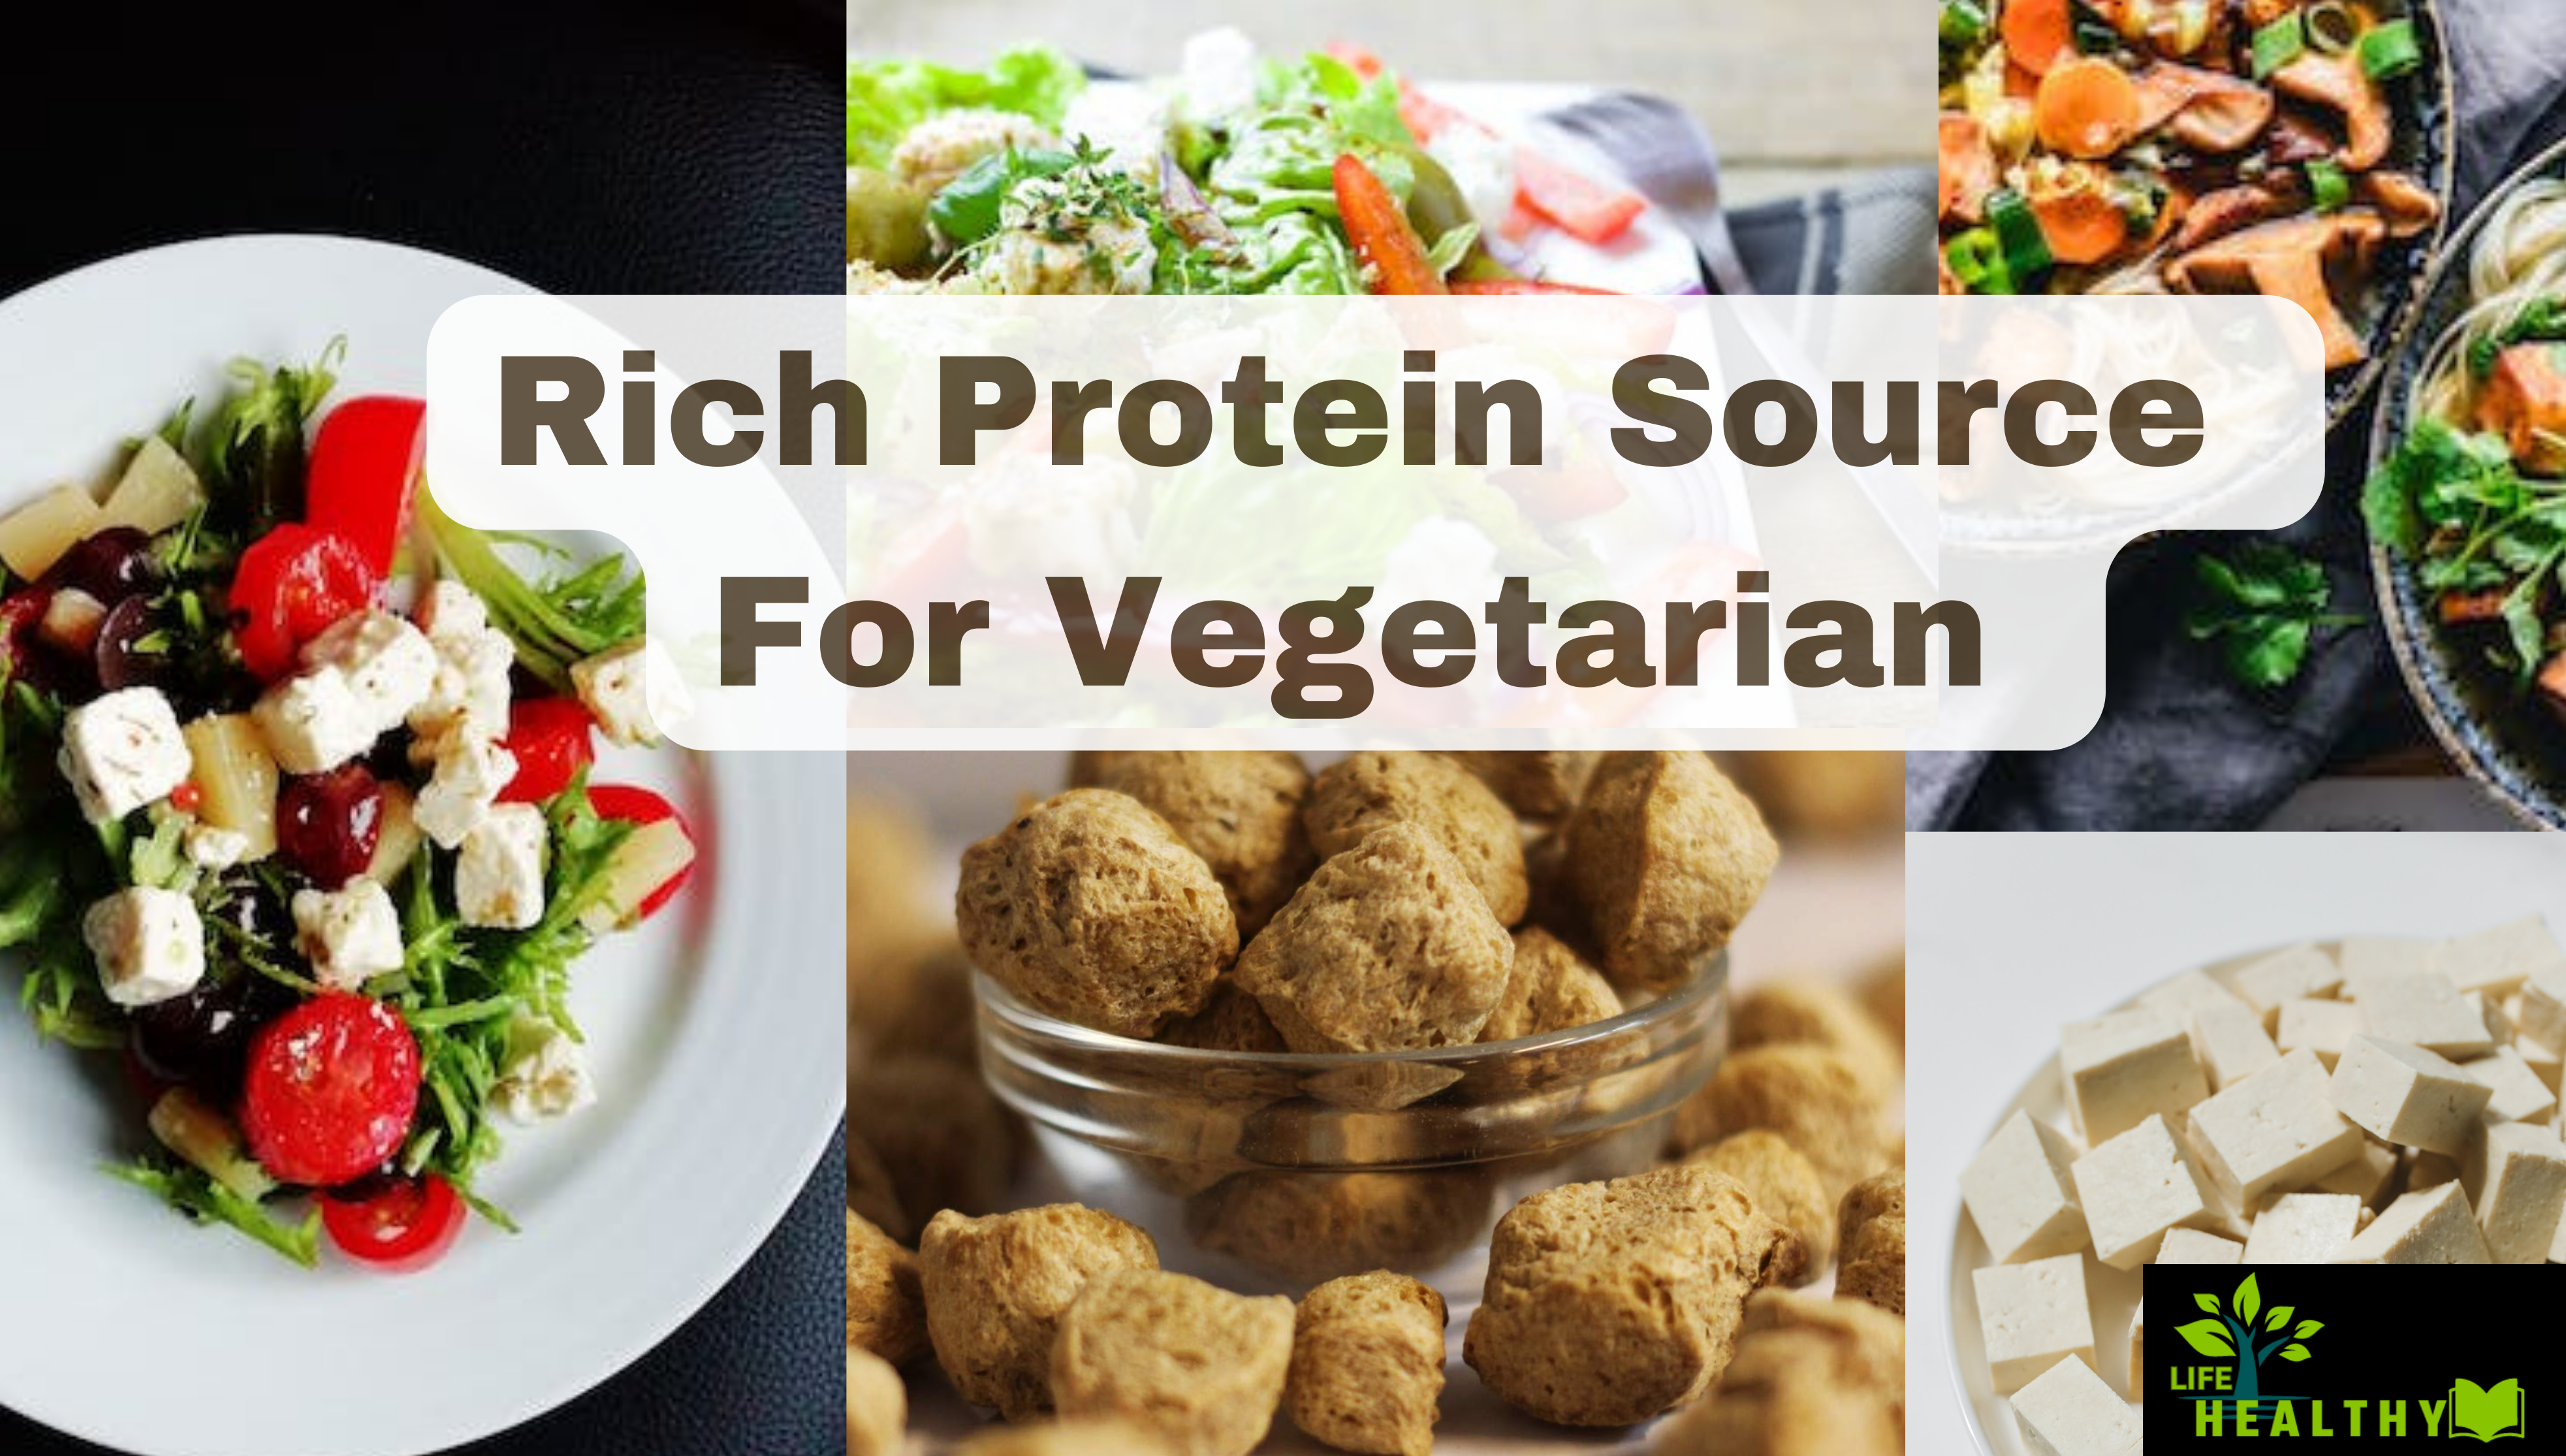 Rich Protein Source For Vegetarian In India